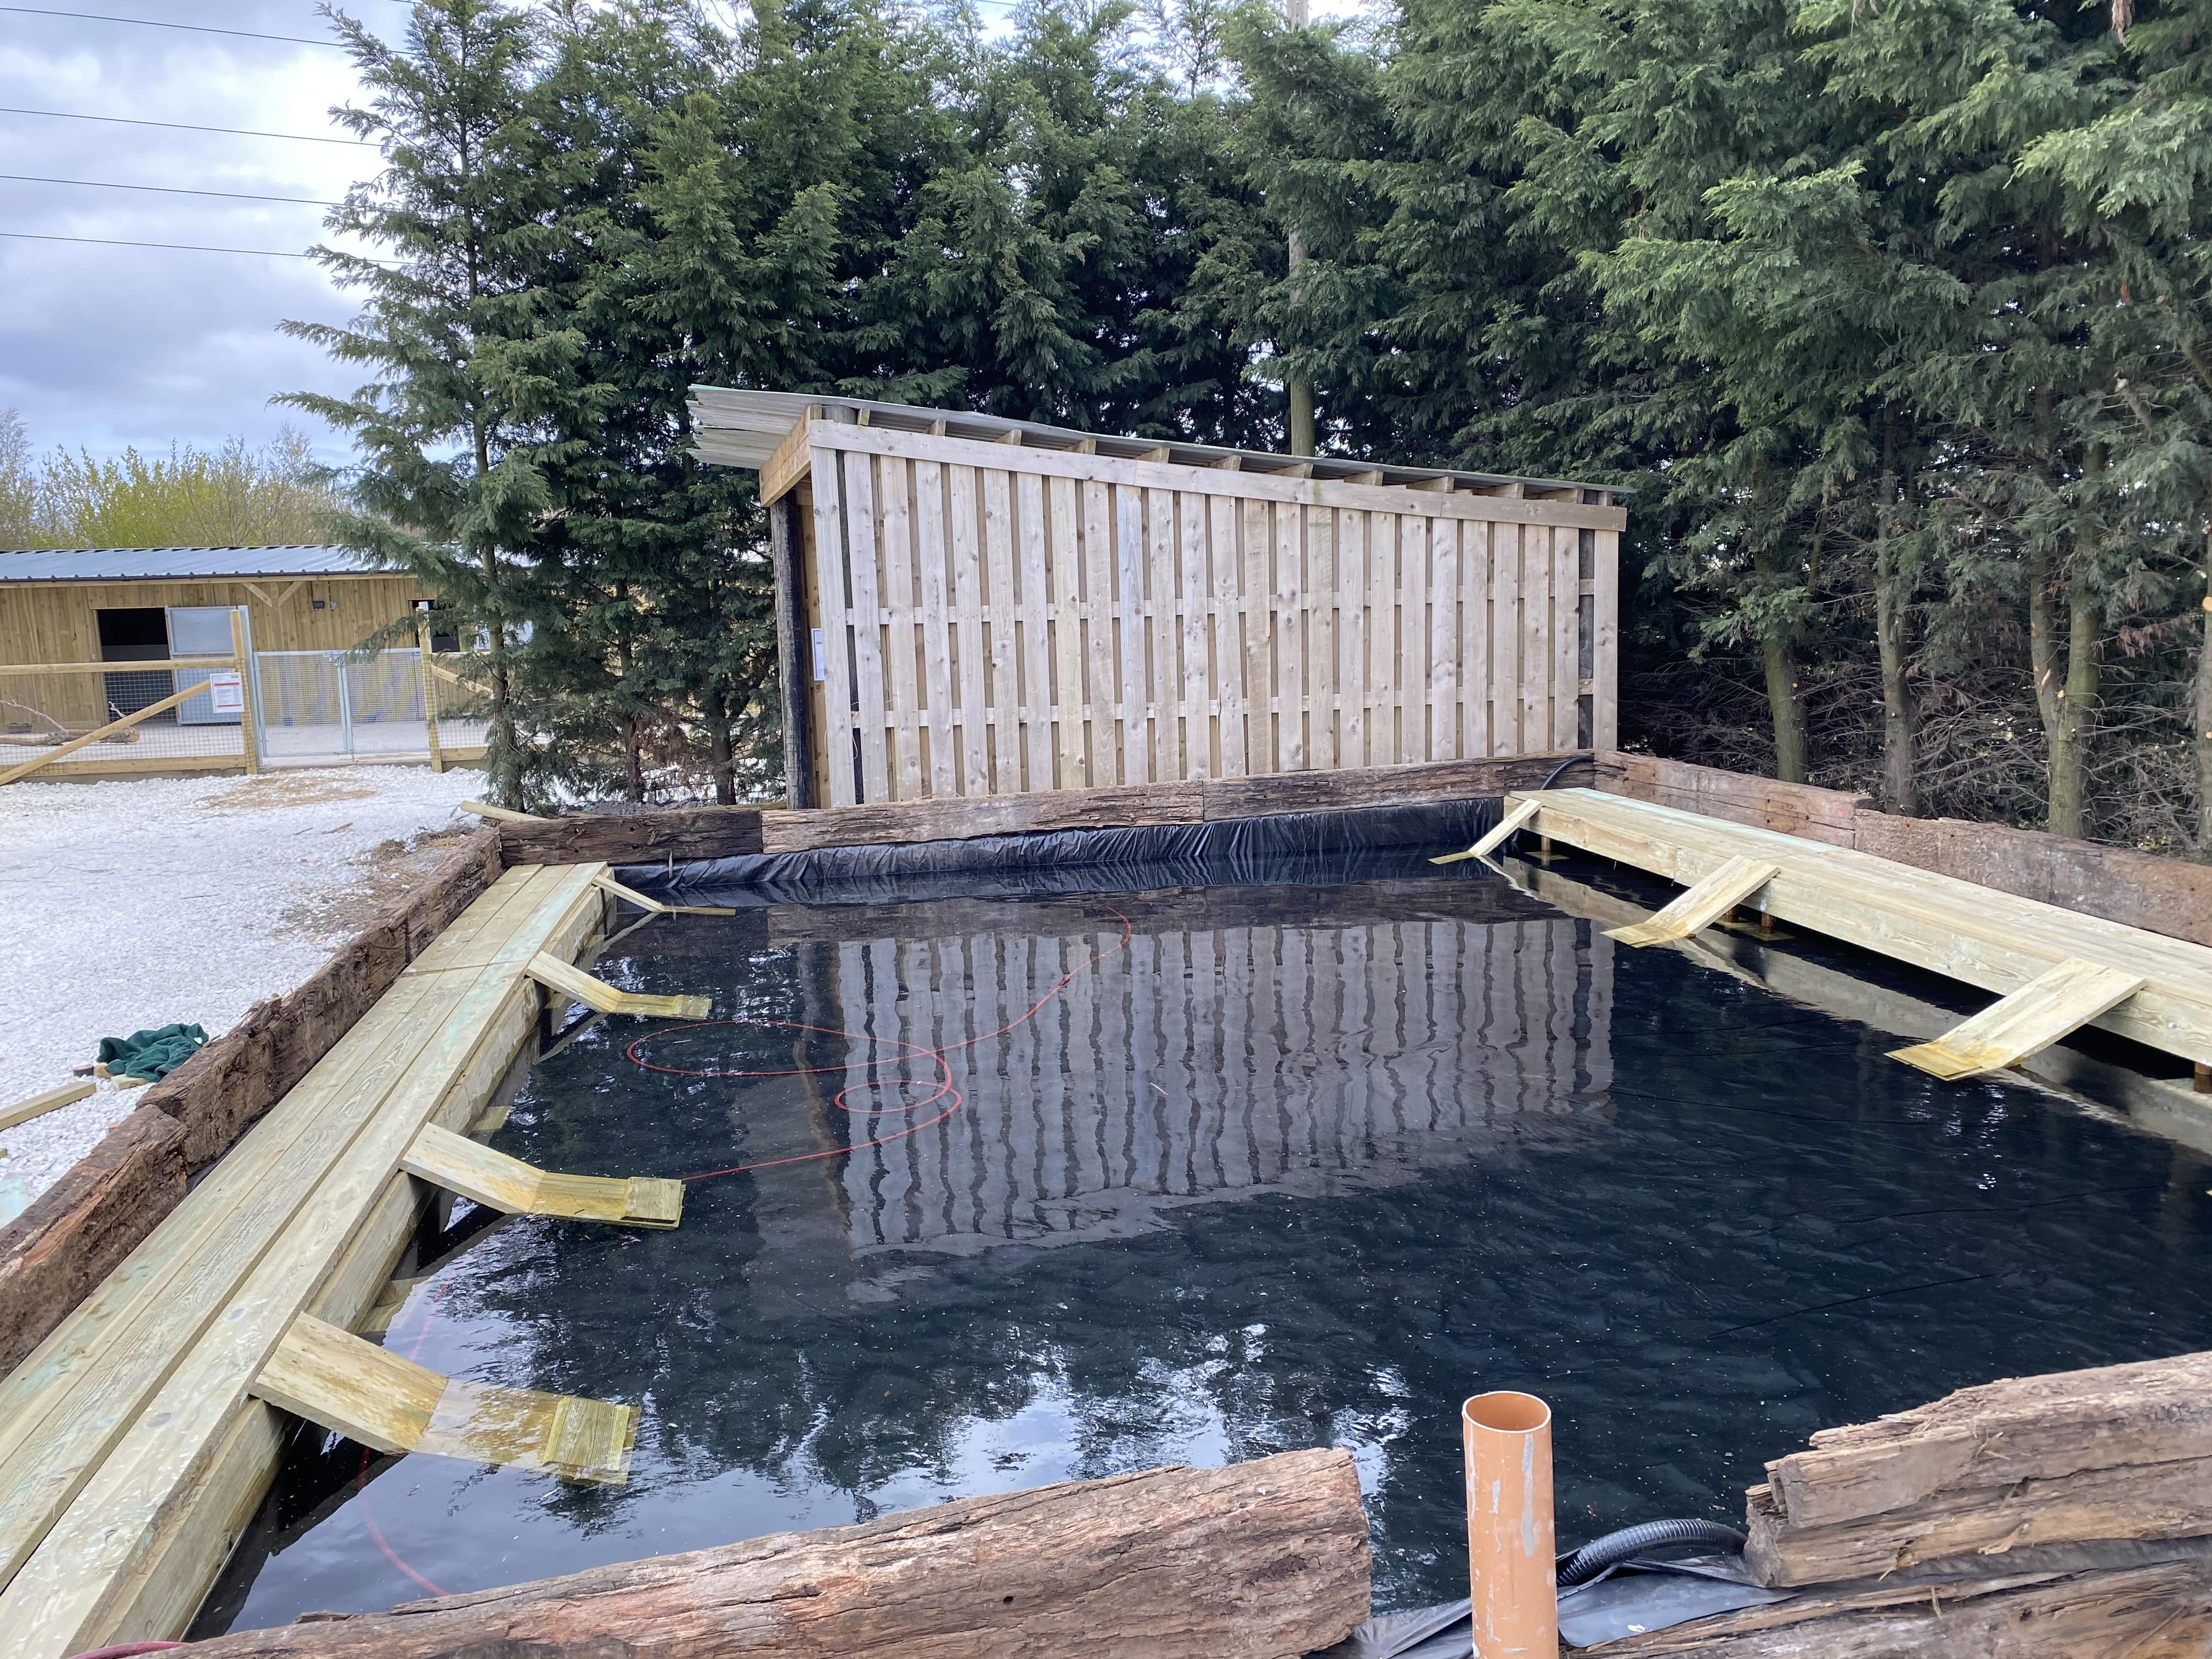 The National Turtle Sanctuary's new turtle pond, build by the King British Team